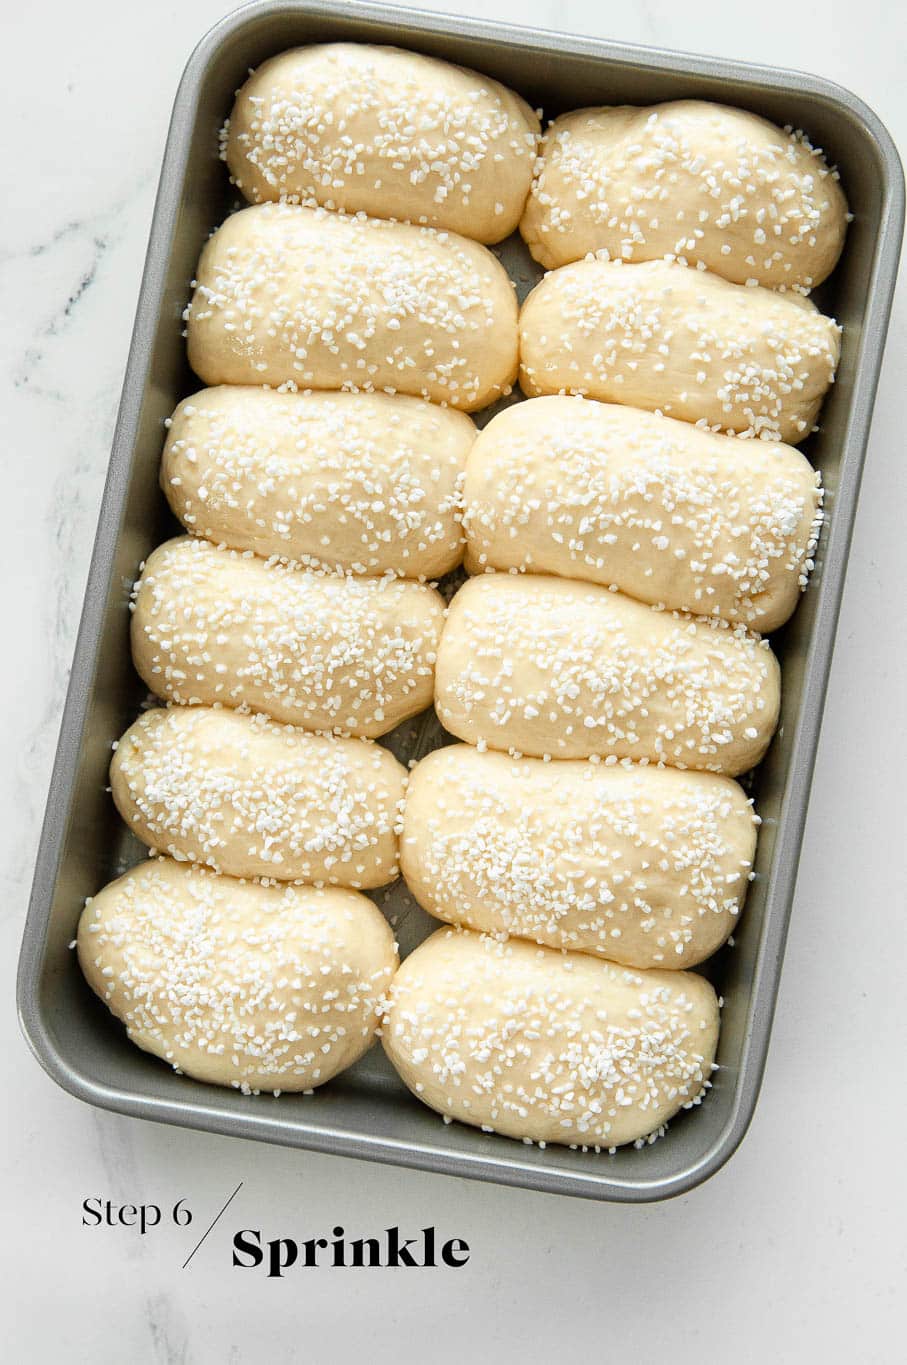 pains au lait in baking pan before going into oven